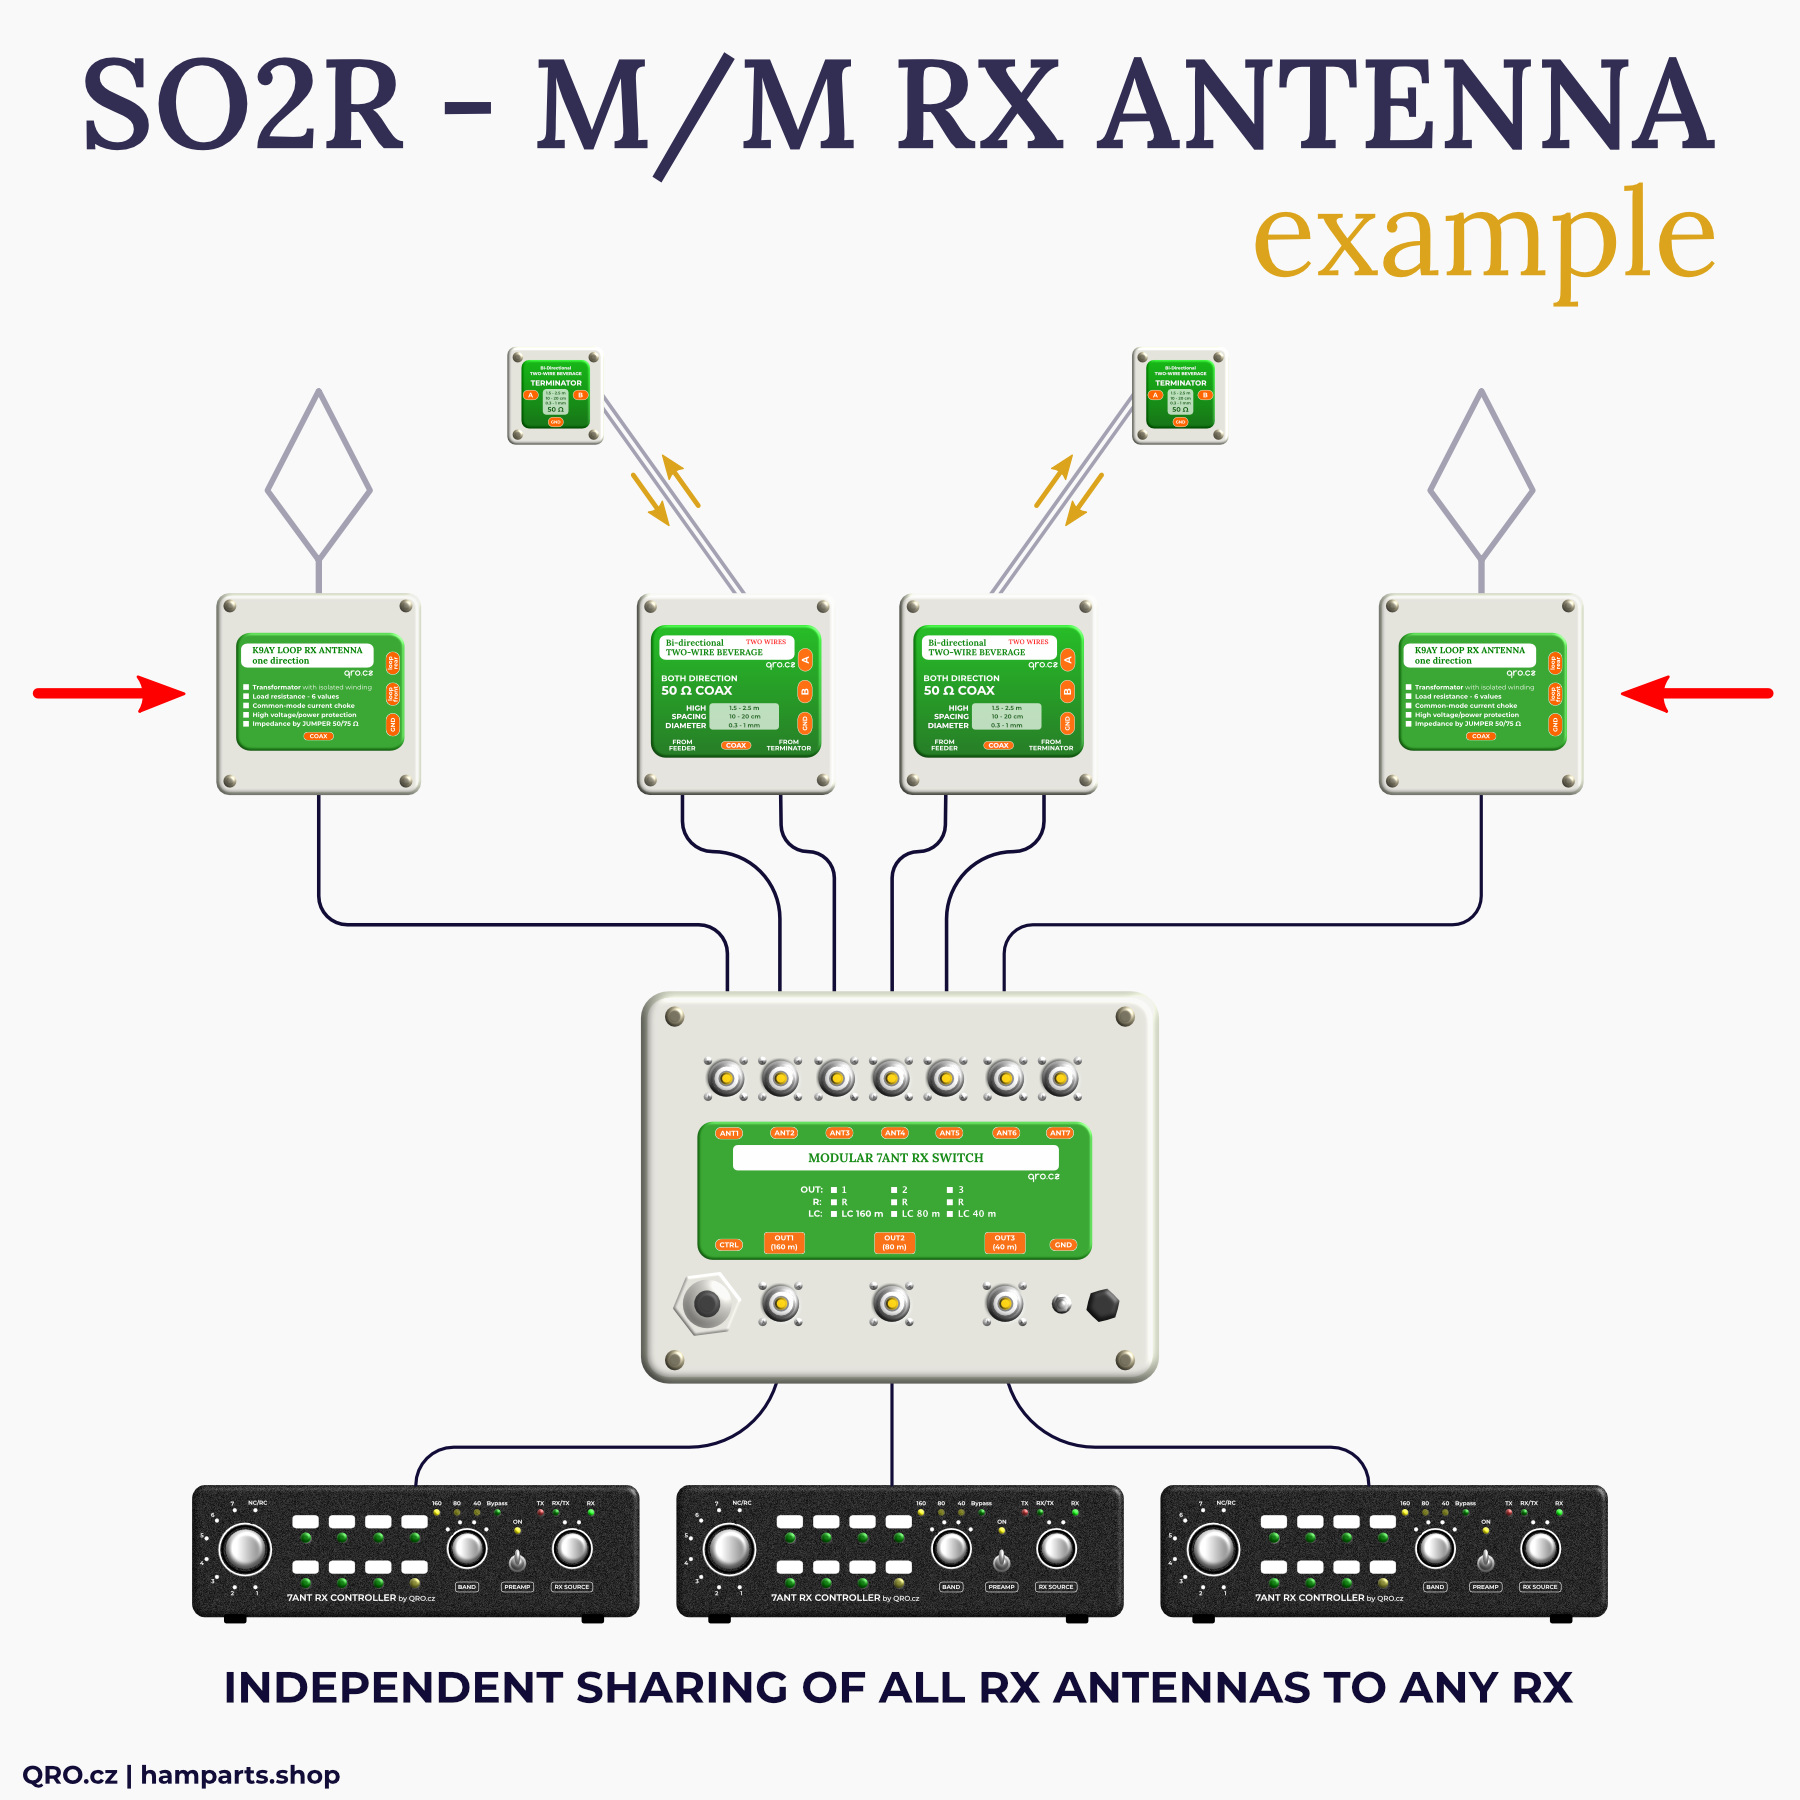 7ant modular switch k9ay one direction bi-directional beverages so2r multi multi rx antenna qro.cz hamparts.shop